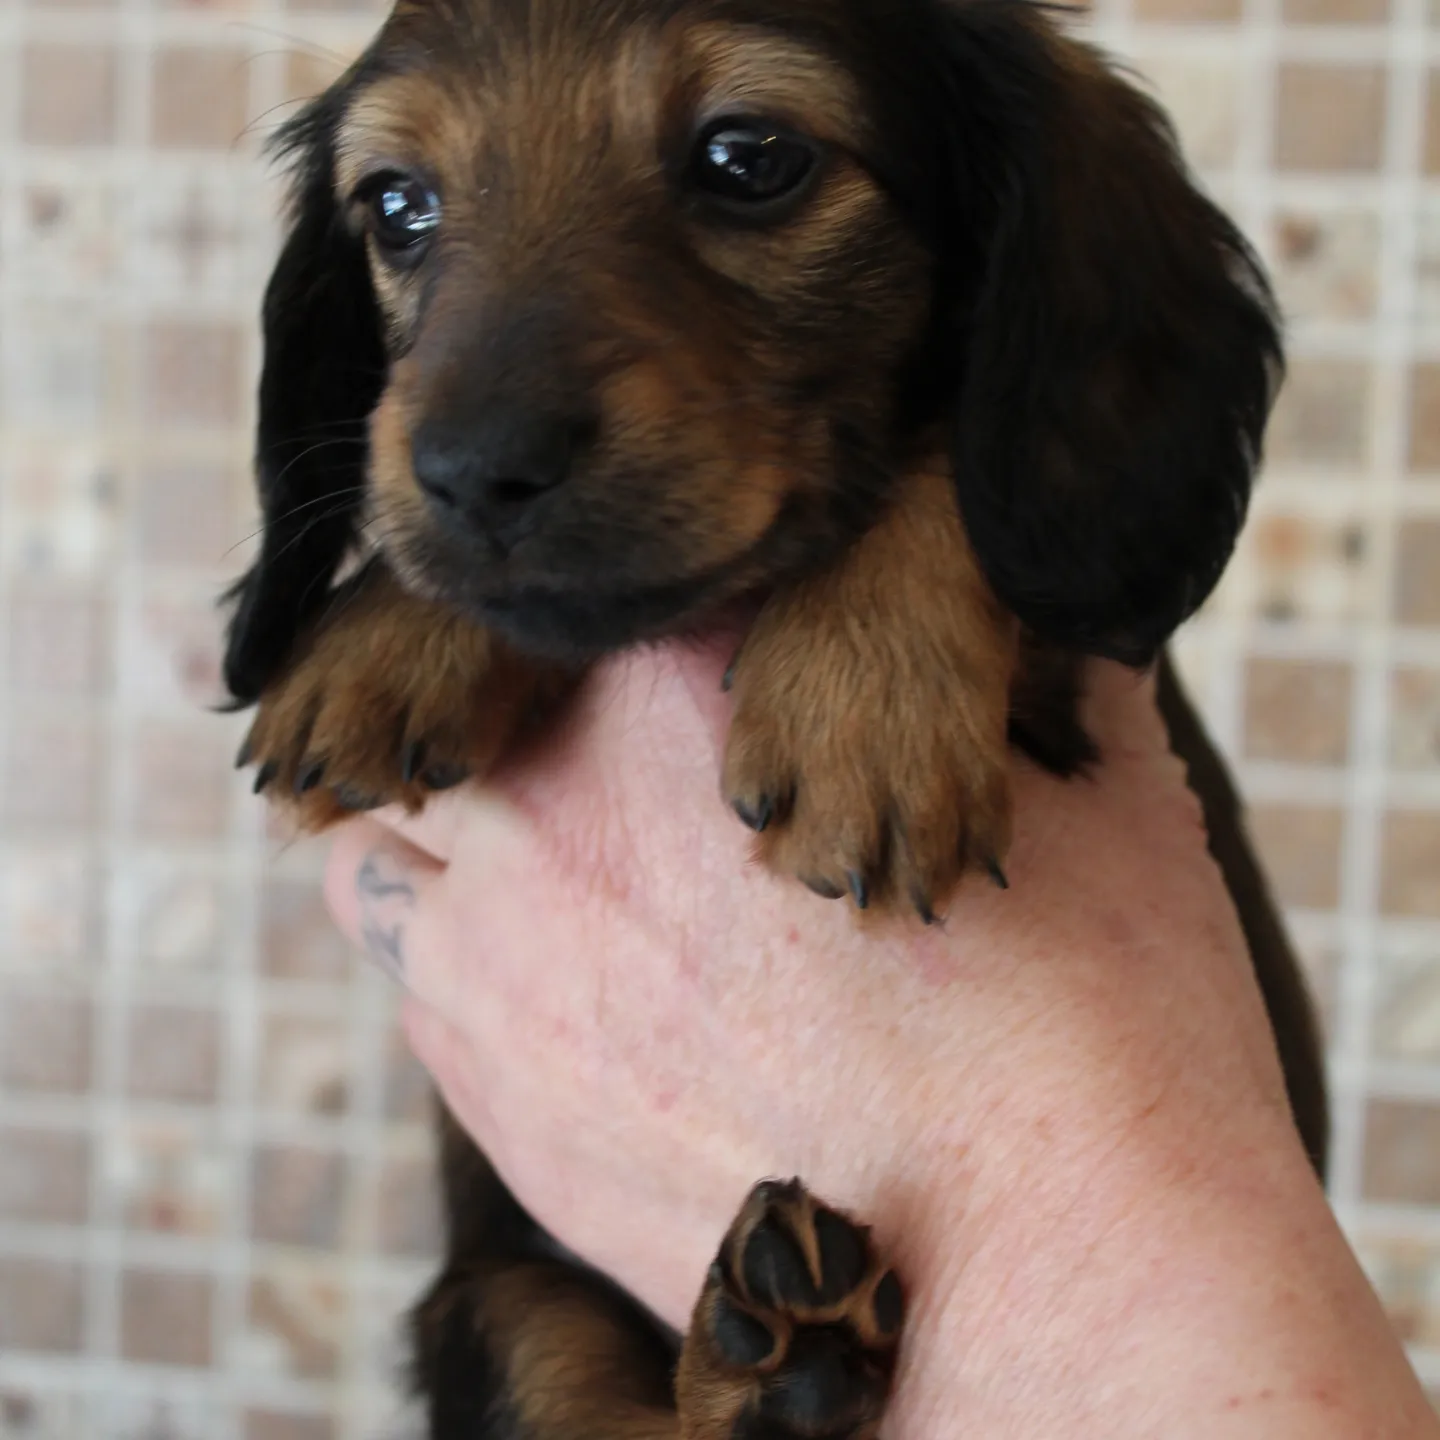 Kc reg Miniature Longhaired Dachshund puppies for sale in Wisbech, Cambridgeshire